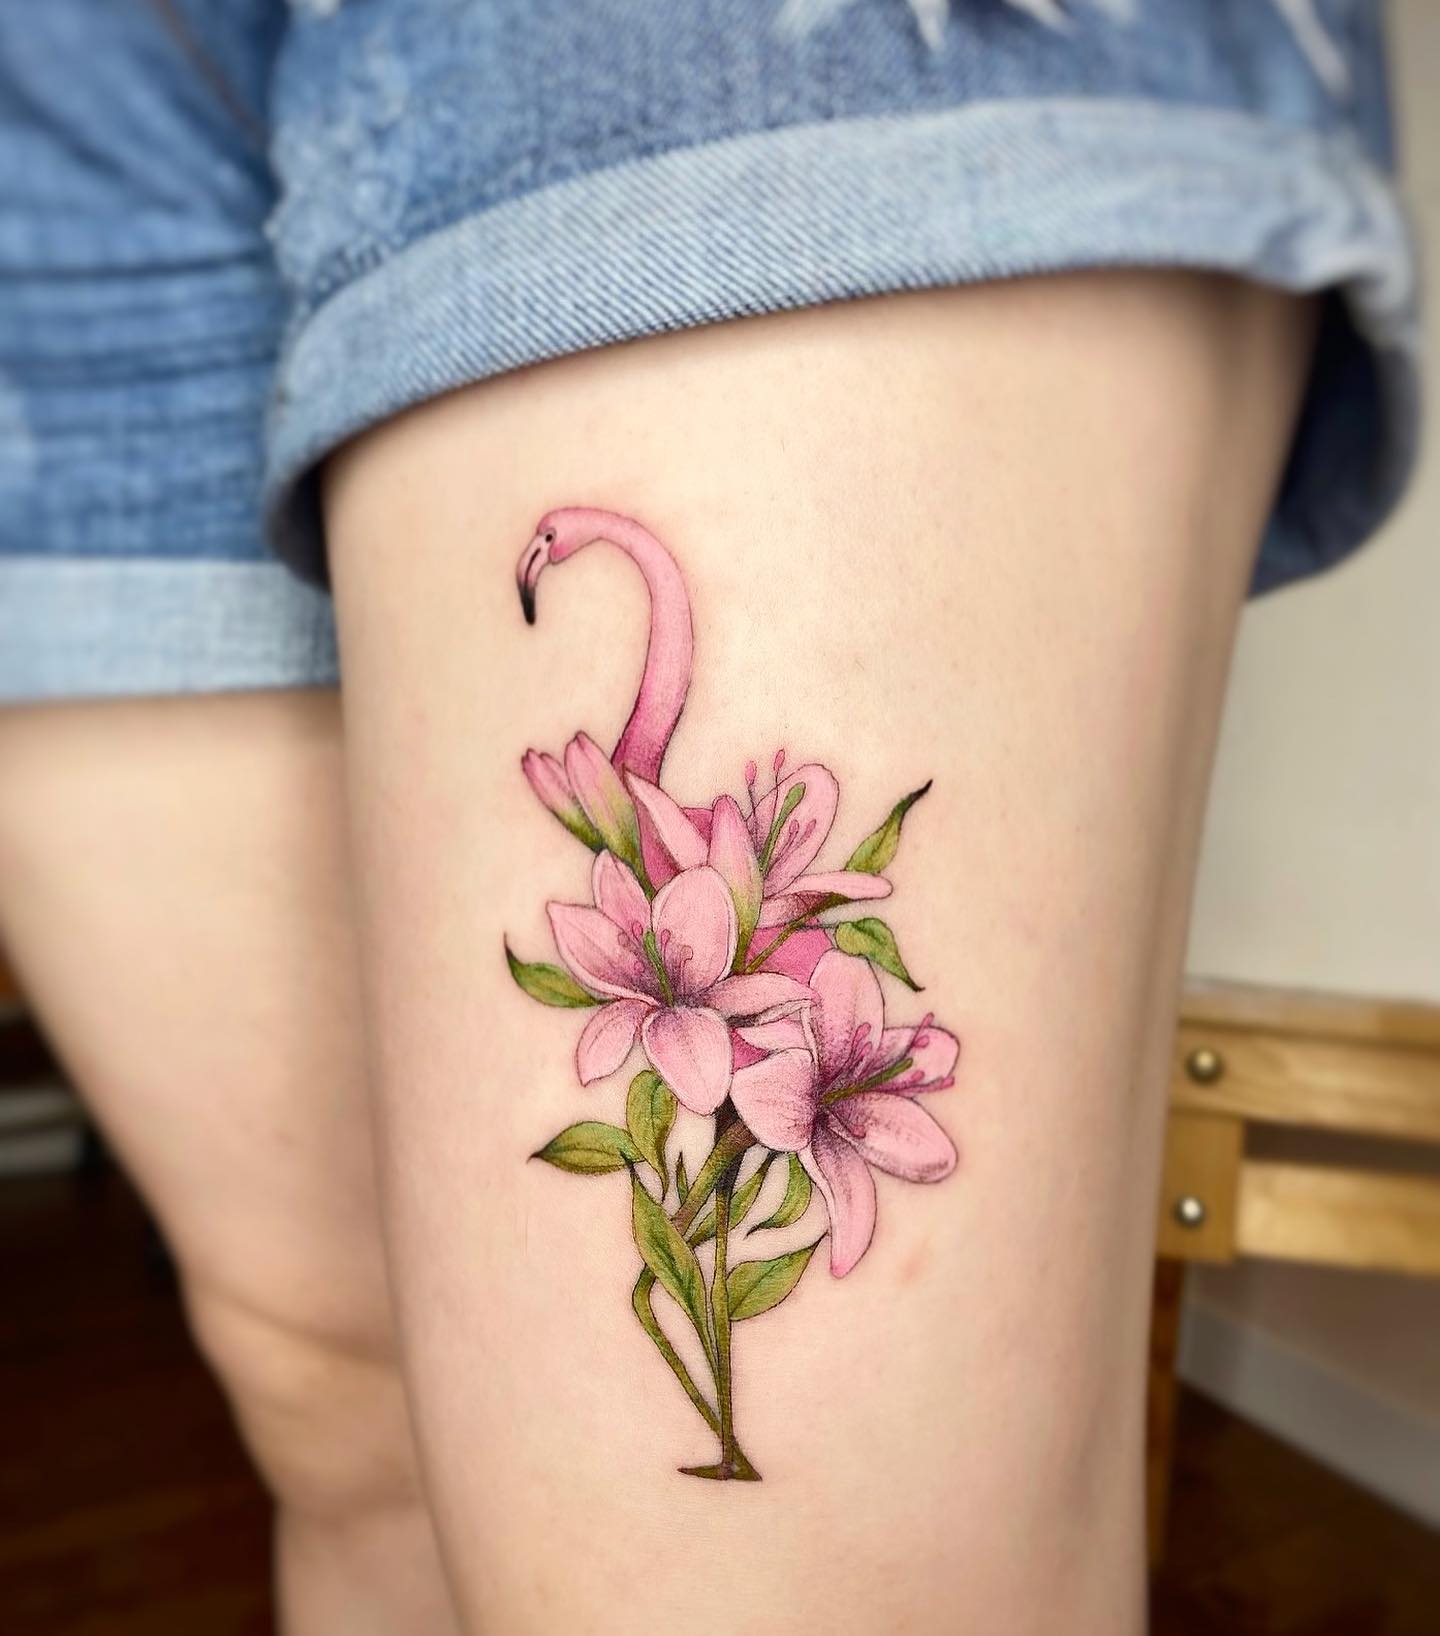 I bet that you have never seen something creative like this! It's really amazing to see how tattoo artists can be so creative. In this tattoo, flamingo's legs are covered in leaves while its upper body is covered with flowers.